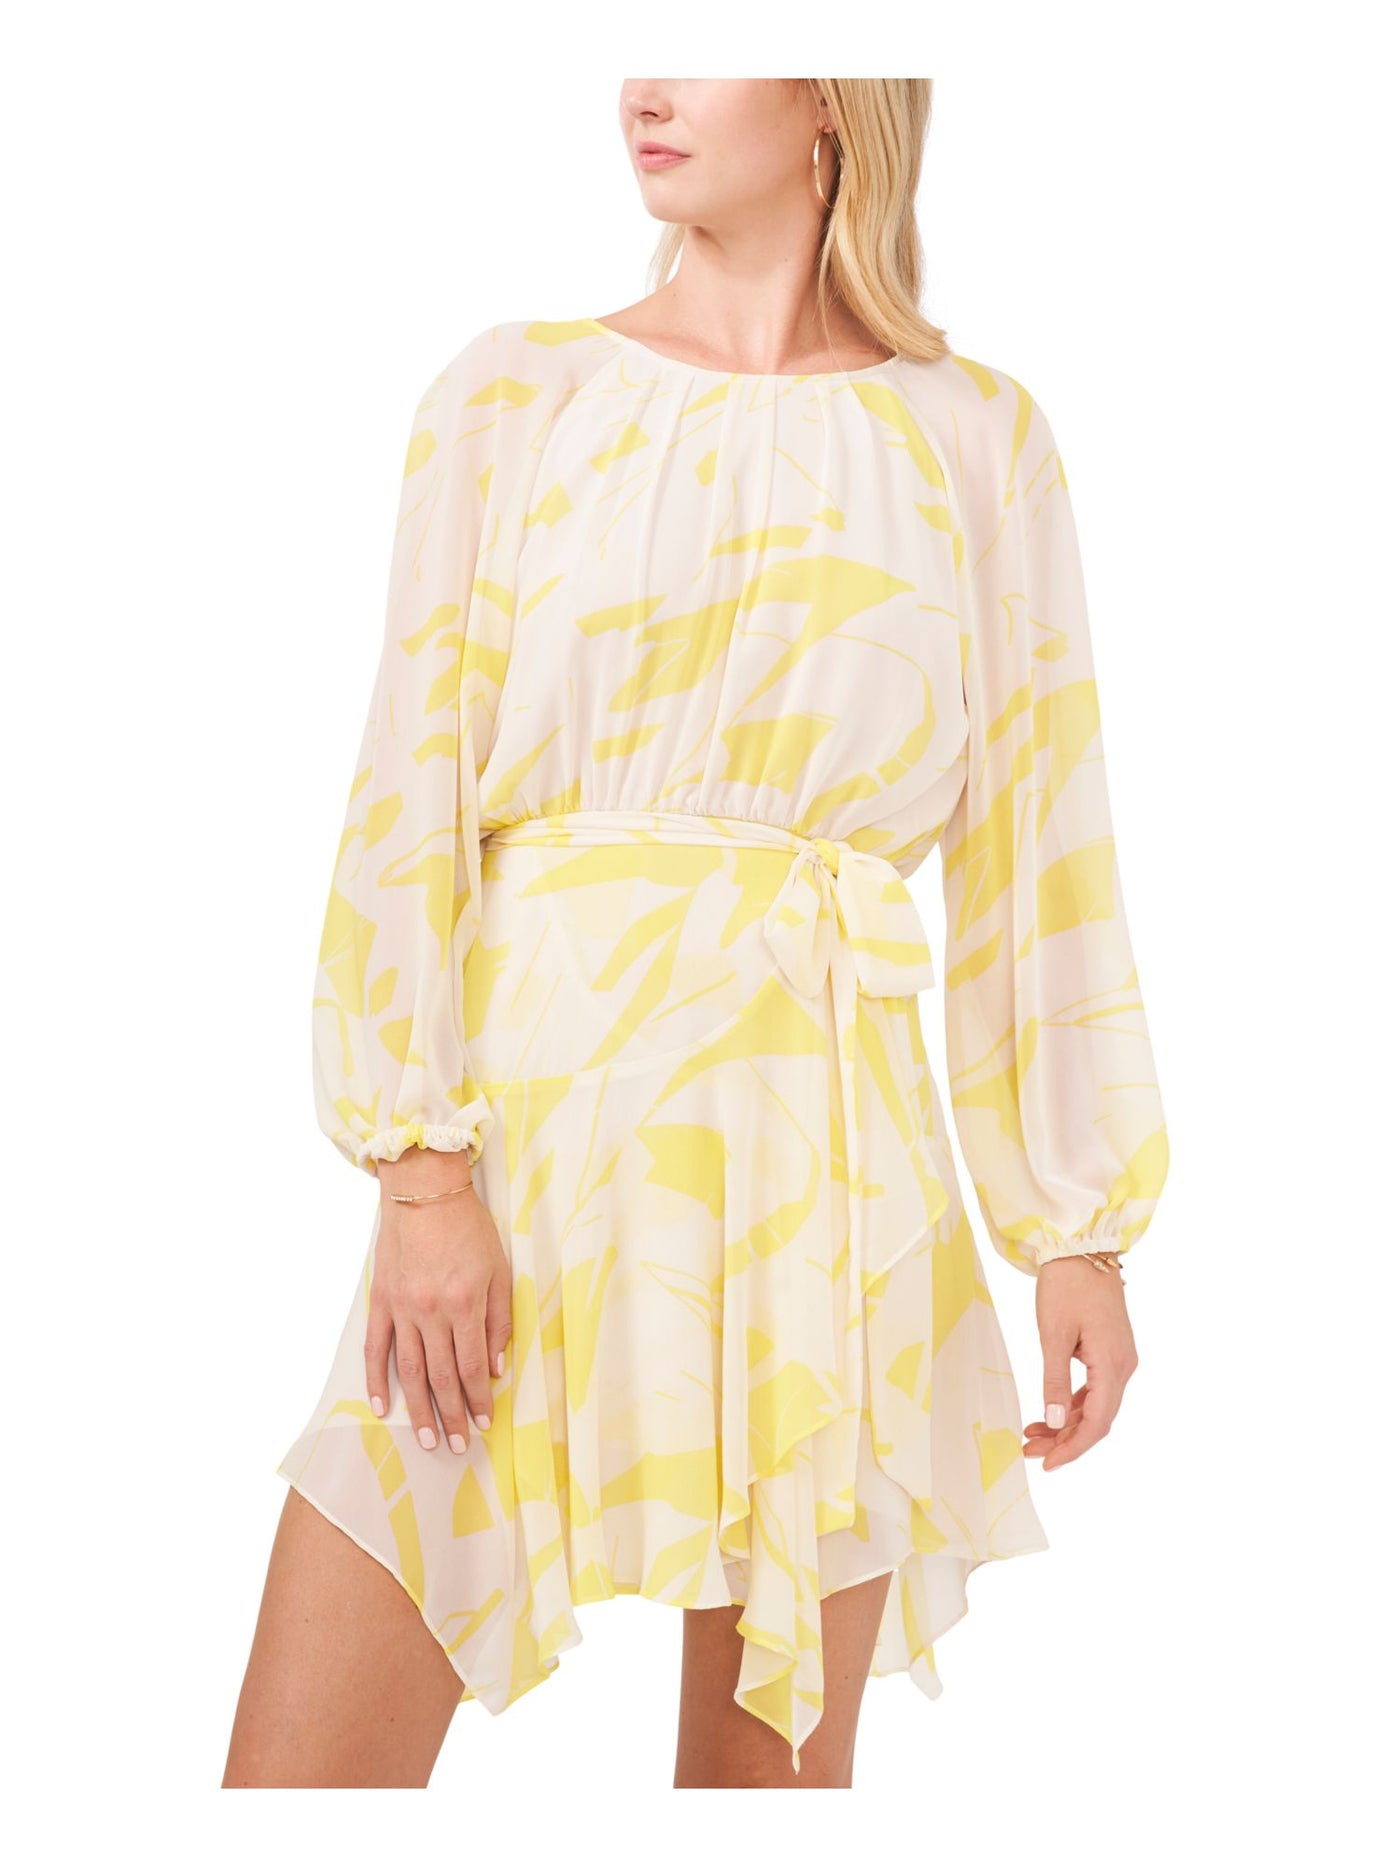 VINCE CAMUTO Womens Yellow Pleated Belted Handkerchief Hem Lined Printed Pouf Sleeve Round Neck Above The Knee Party Fit + Flare Dress S